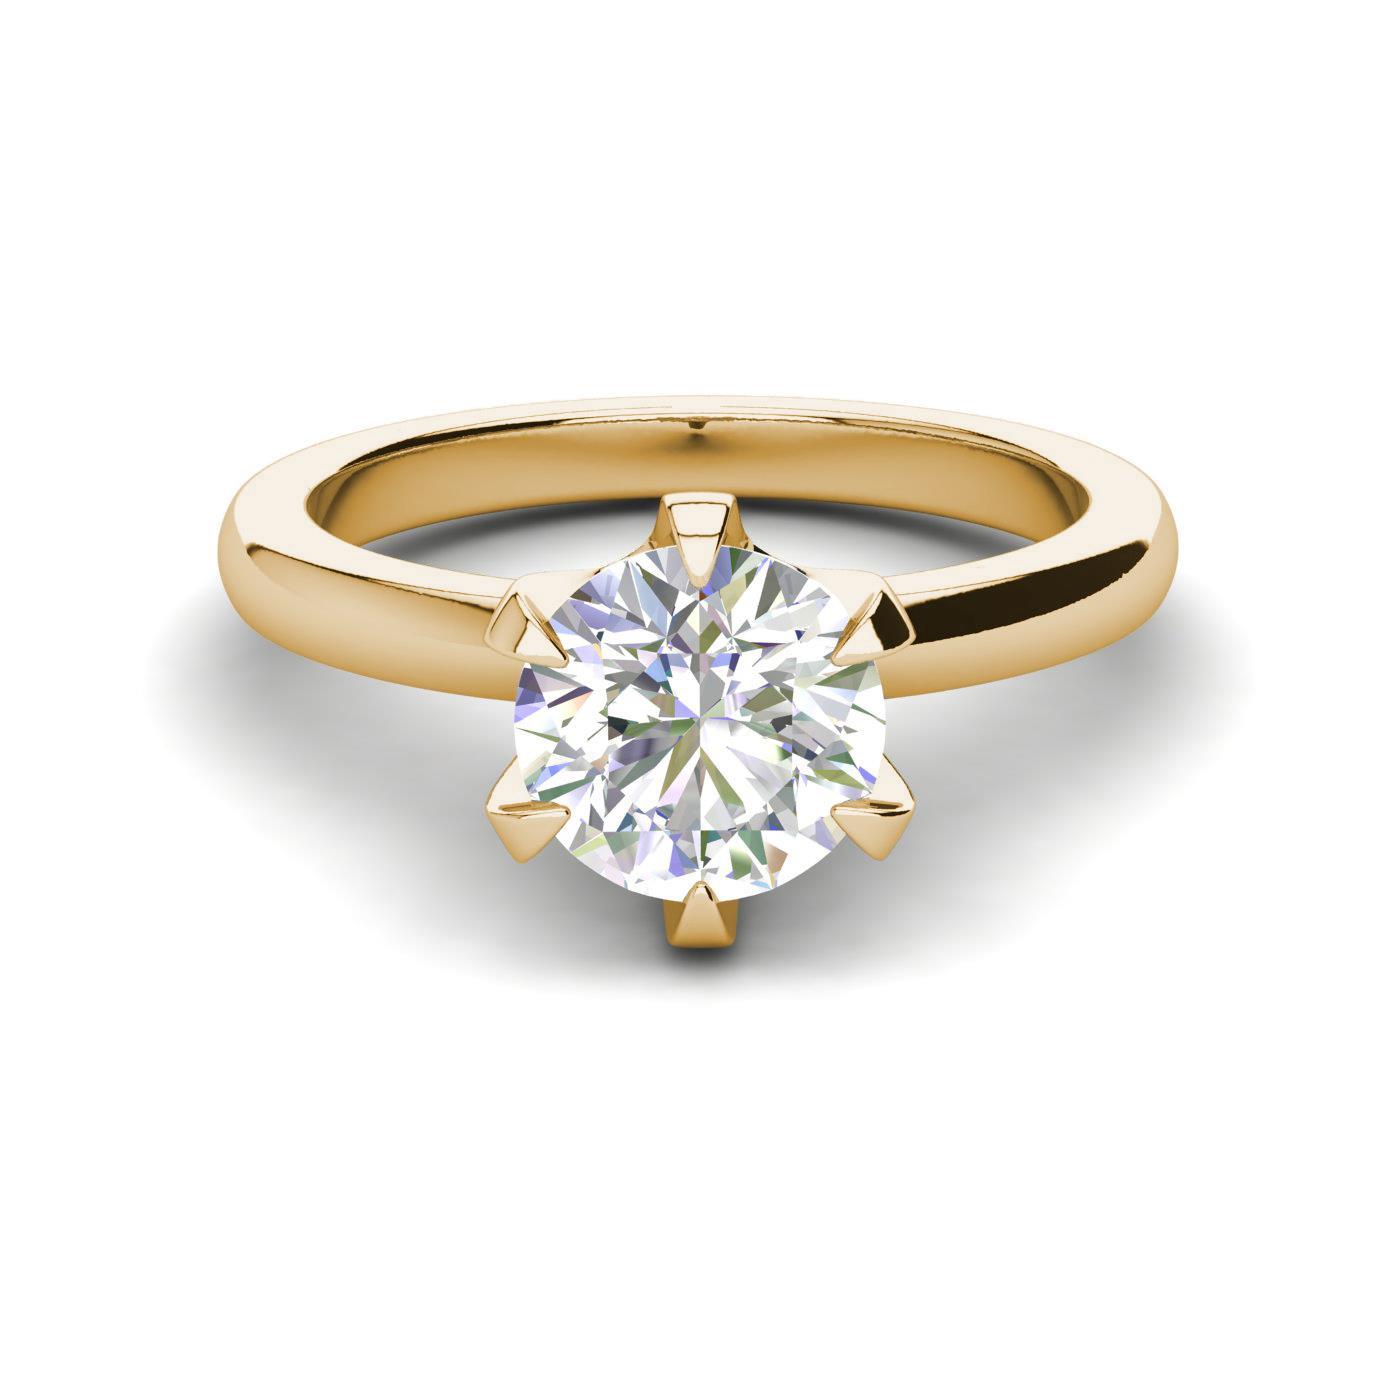 Solitaire 25 Carat Vs2d Round Cut Diamond Engagement Ring Yellow Gold